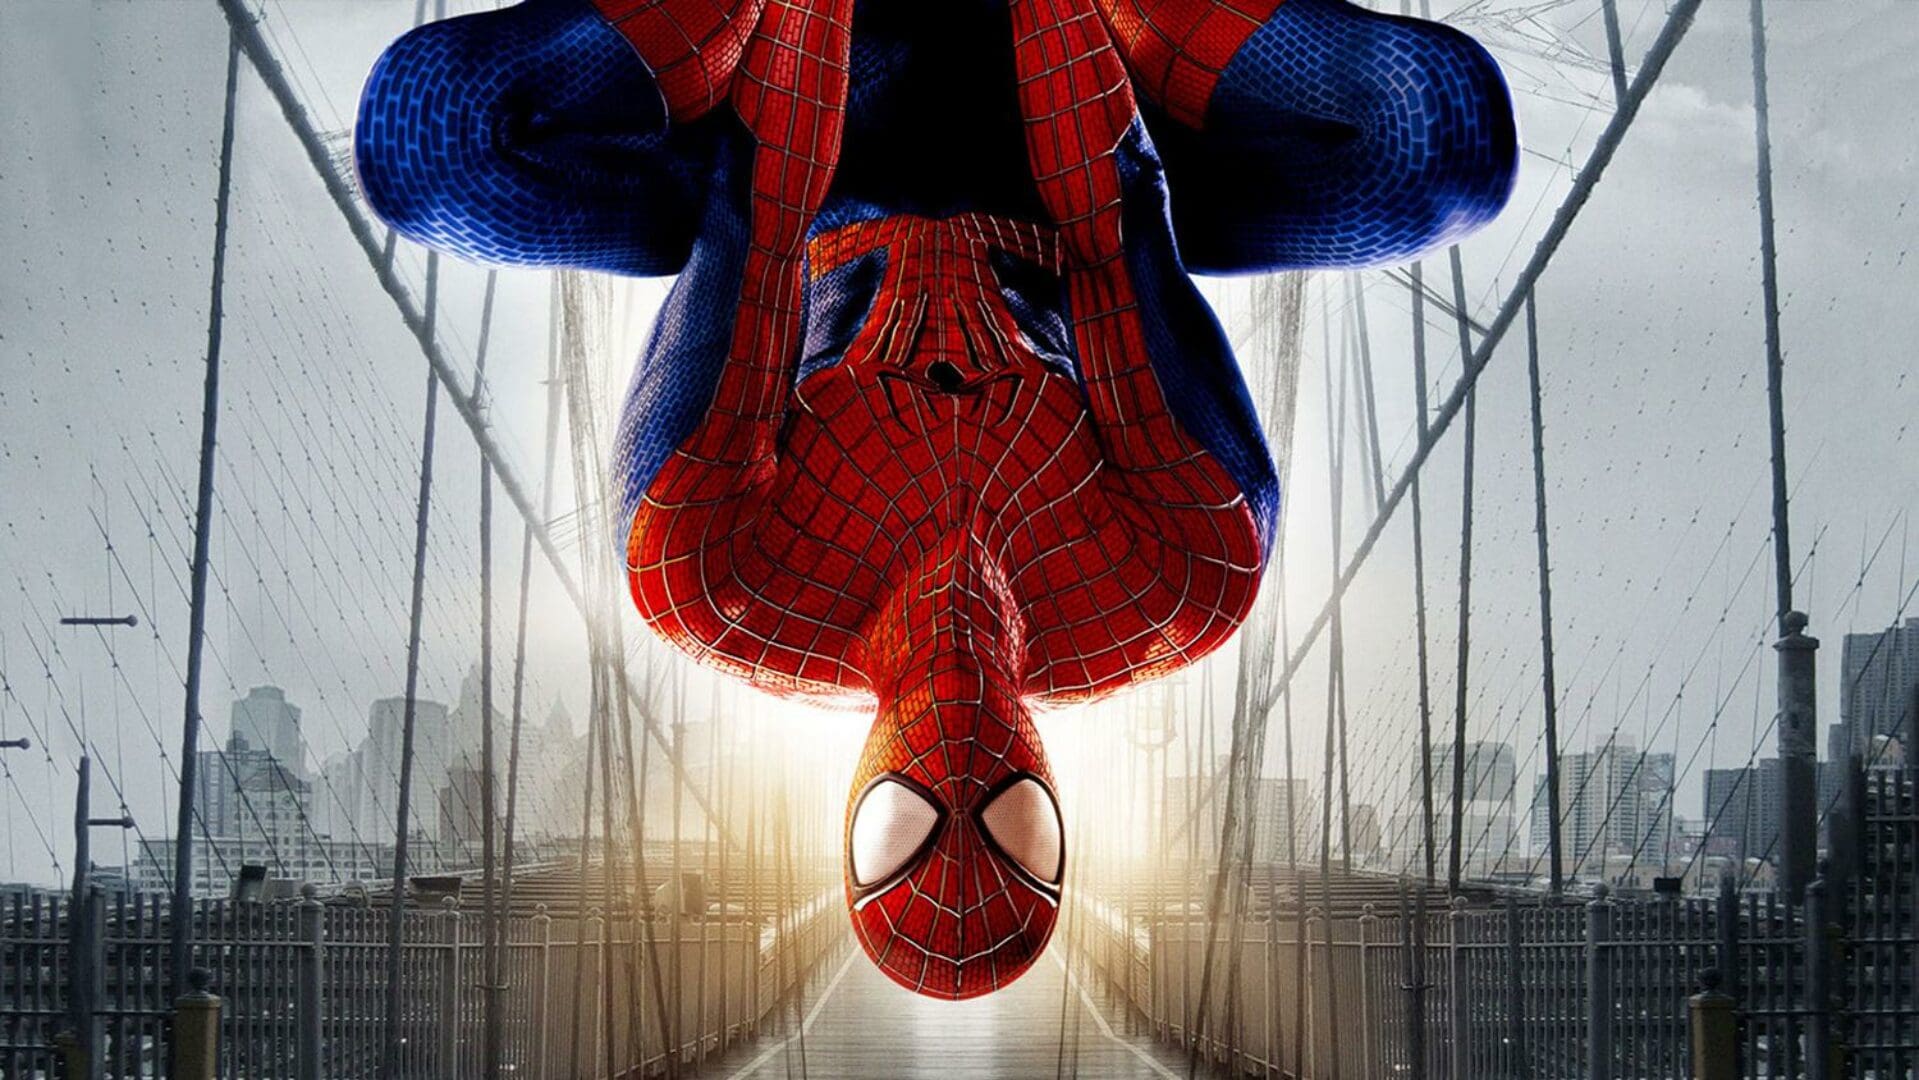 Review: The Amazing Spider-Man 2 (PS3)